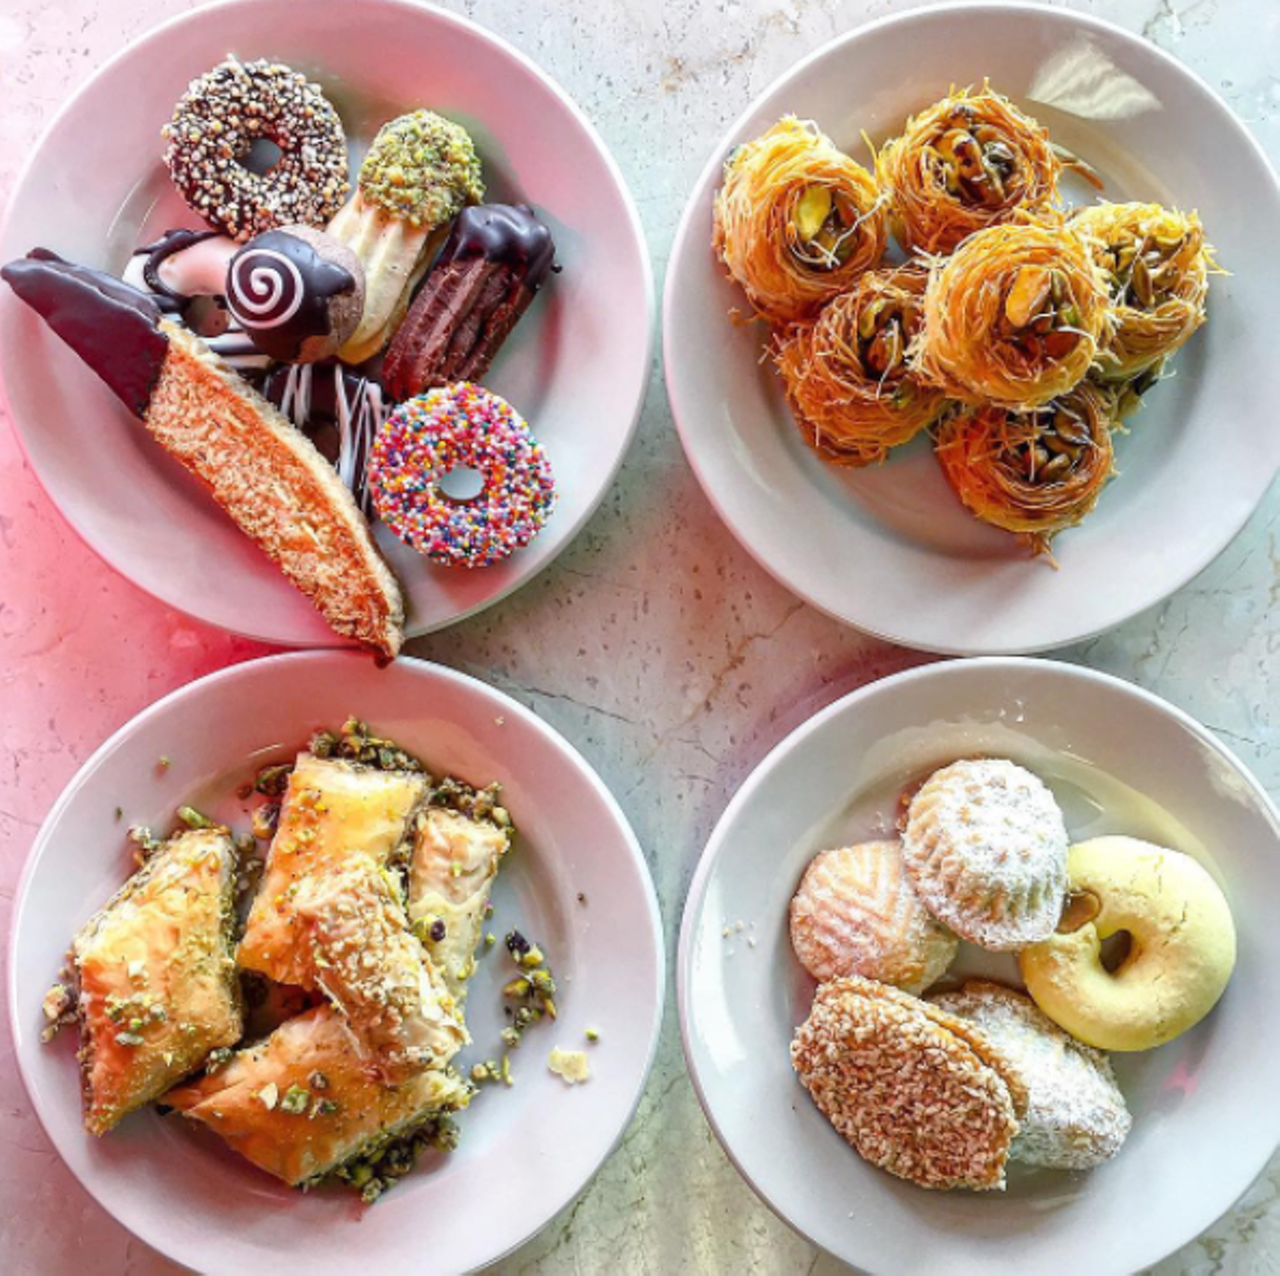 Baklovah Bakery
9329 Wurzbach Road, Suite 104, (210) 982-3231.
The latest member of the Pasha Mediterranean Grill restaurant family, Baklovah Bakery specializes in sweets from across the Mediterranean, including, of course, plenty of baklovah. 
Photo via Instagram, s.a.foodie